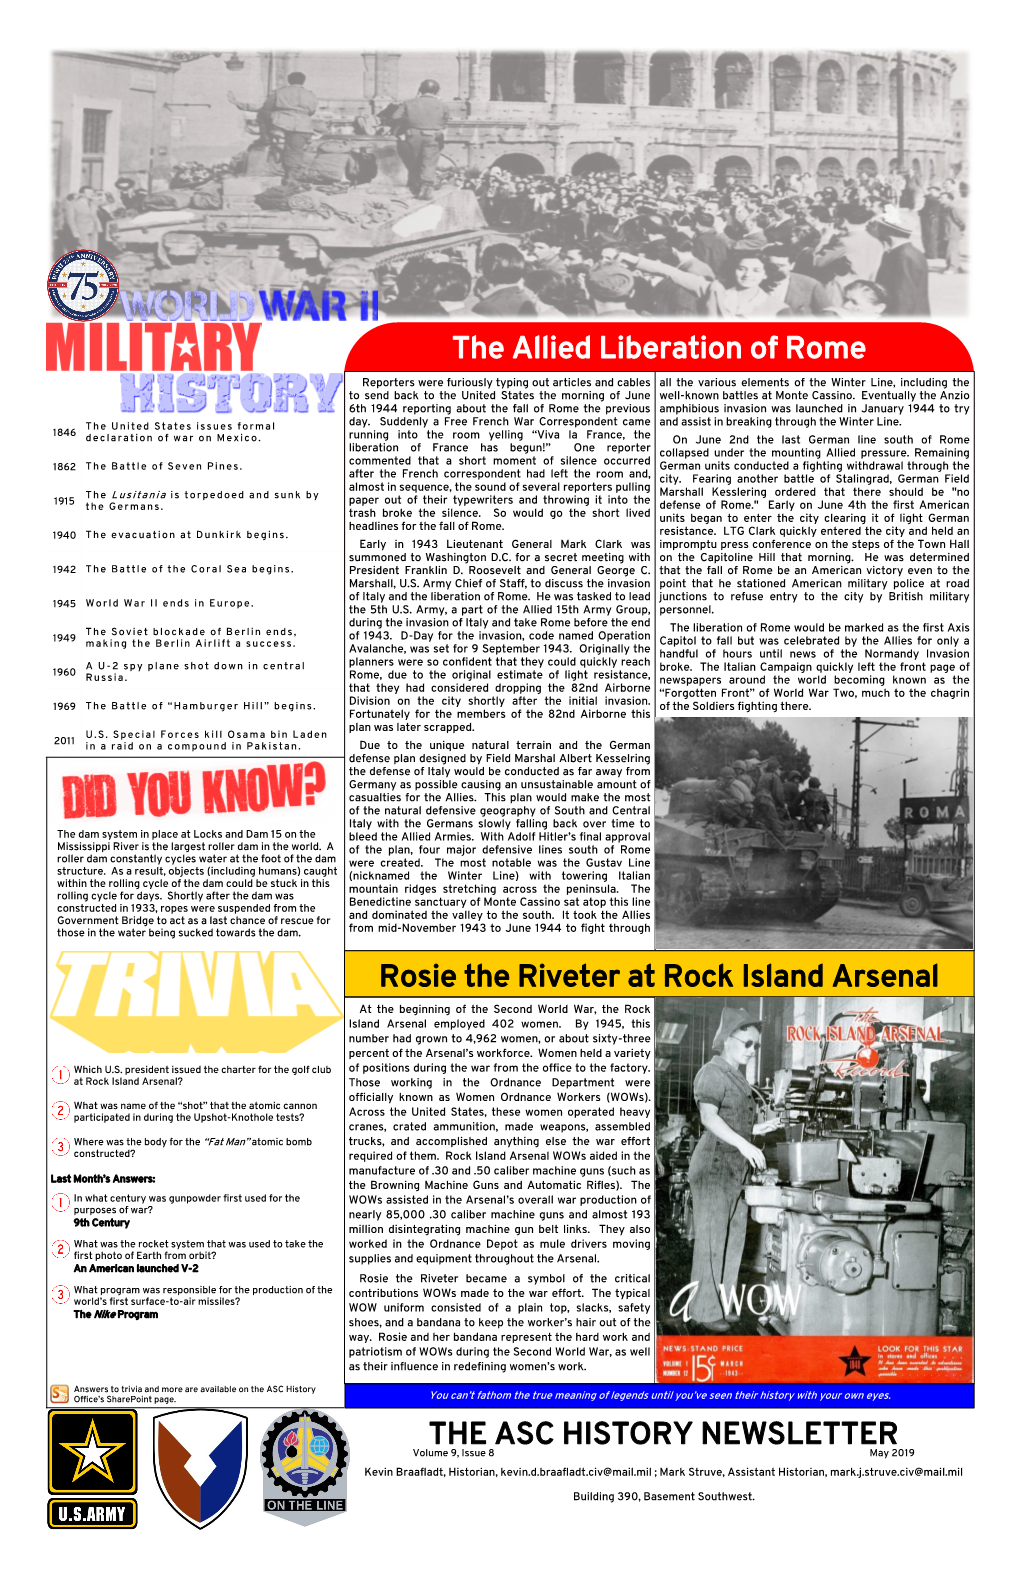 THE ASC HISTORY NEWSLETTER the Allied Liberation of Rome Rosie the Riveter at Rock Island Arsenal